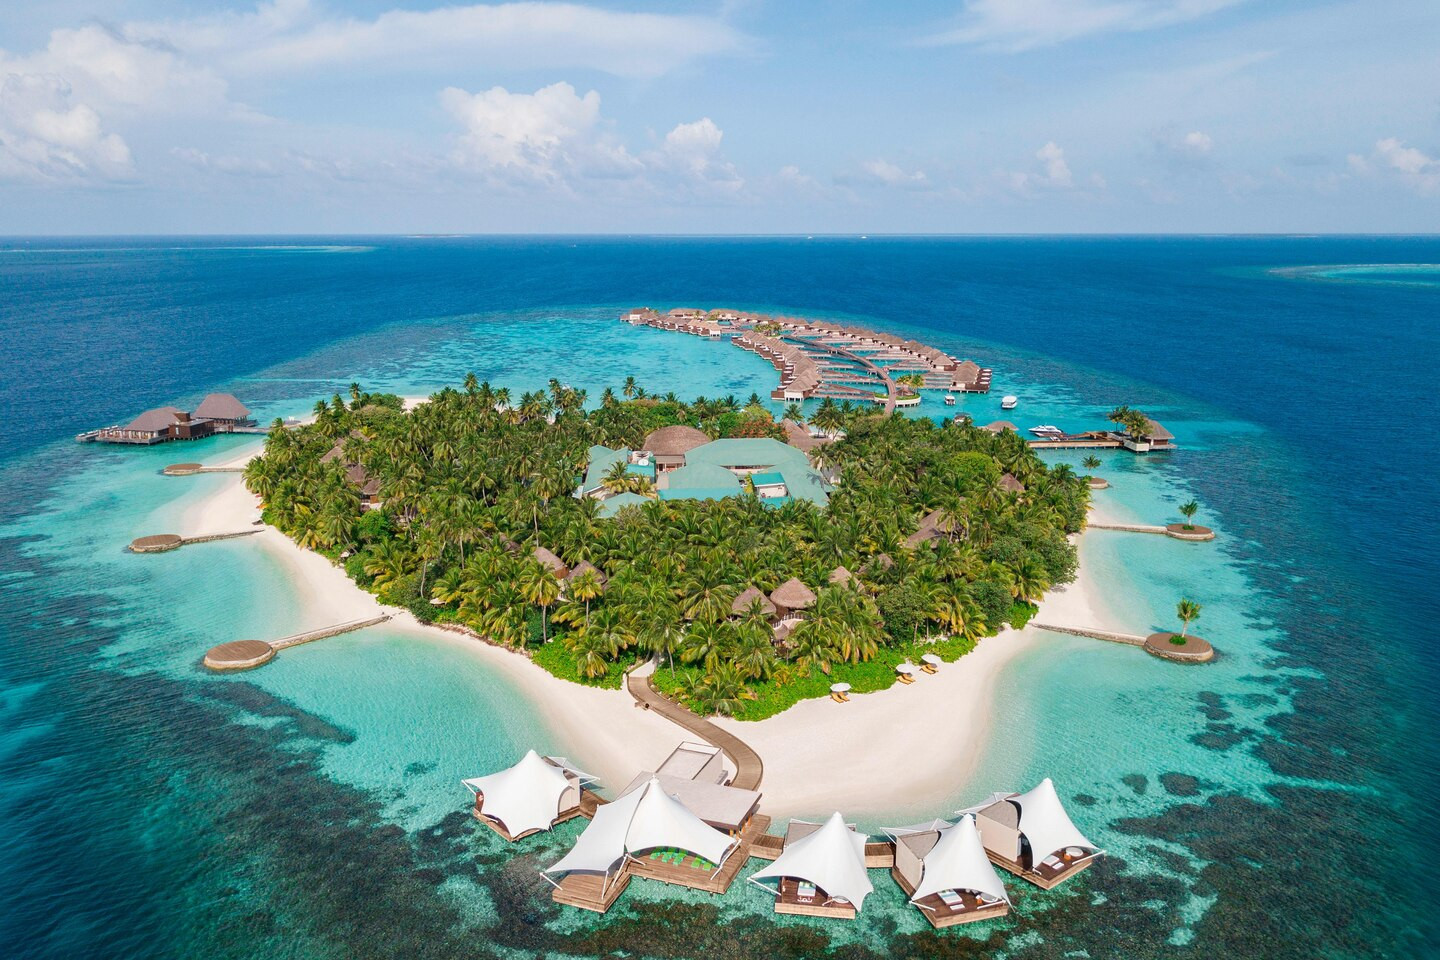 This Summer, Experience An Exclusive Full Island Takeover At W Maldives